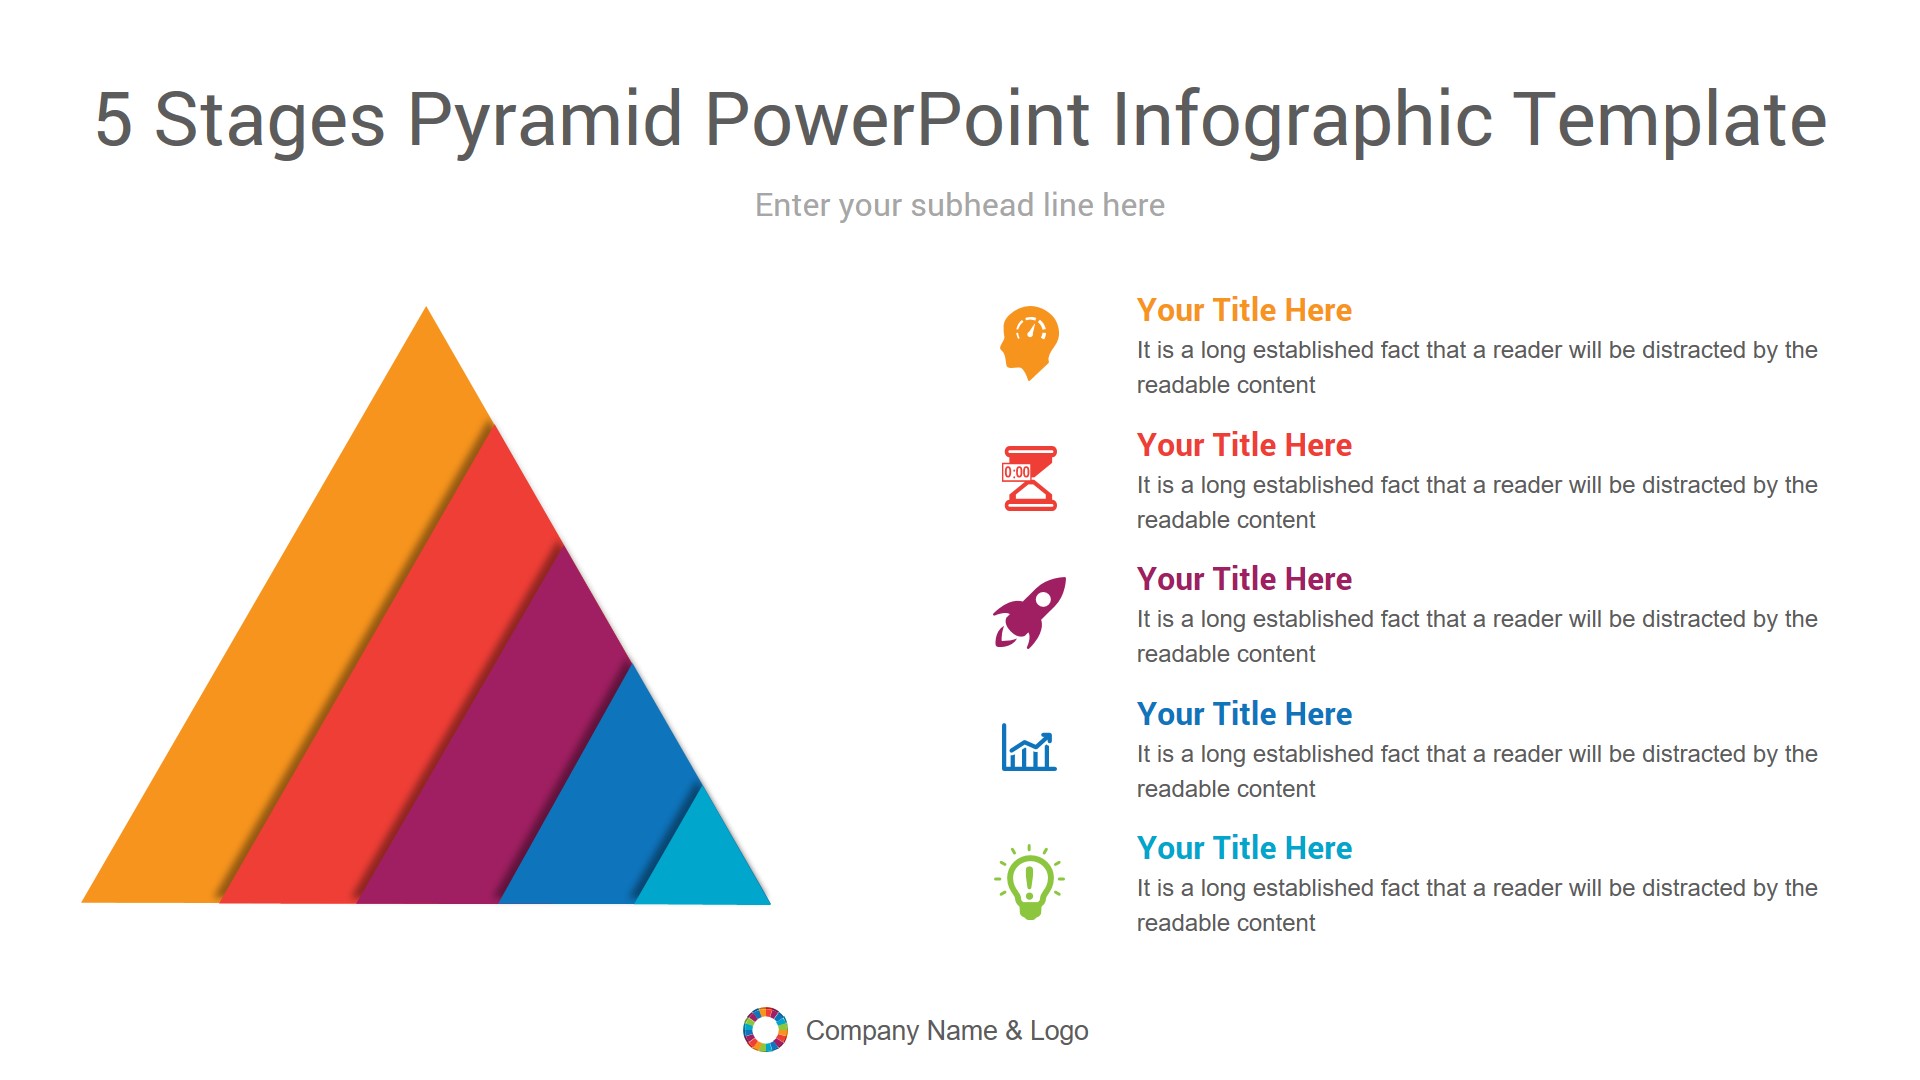 5 stages pyramid powerpoint infographic template